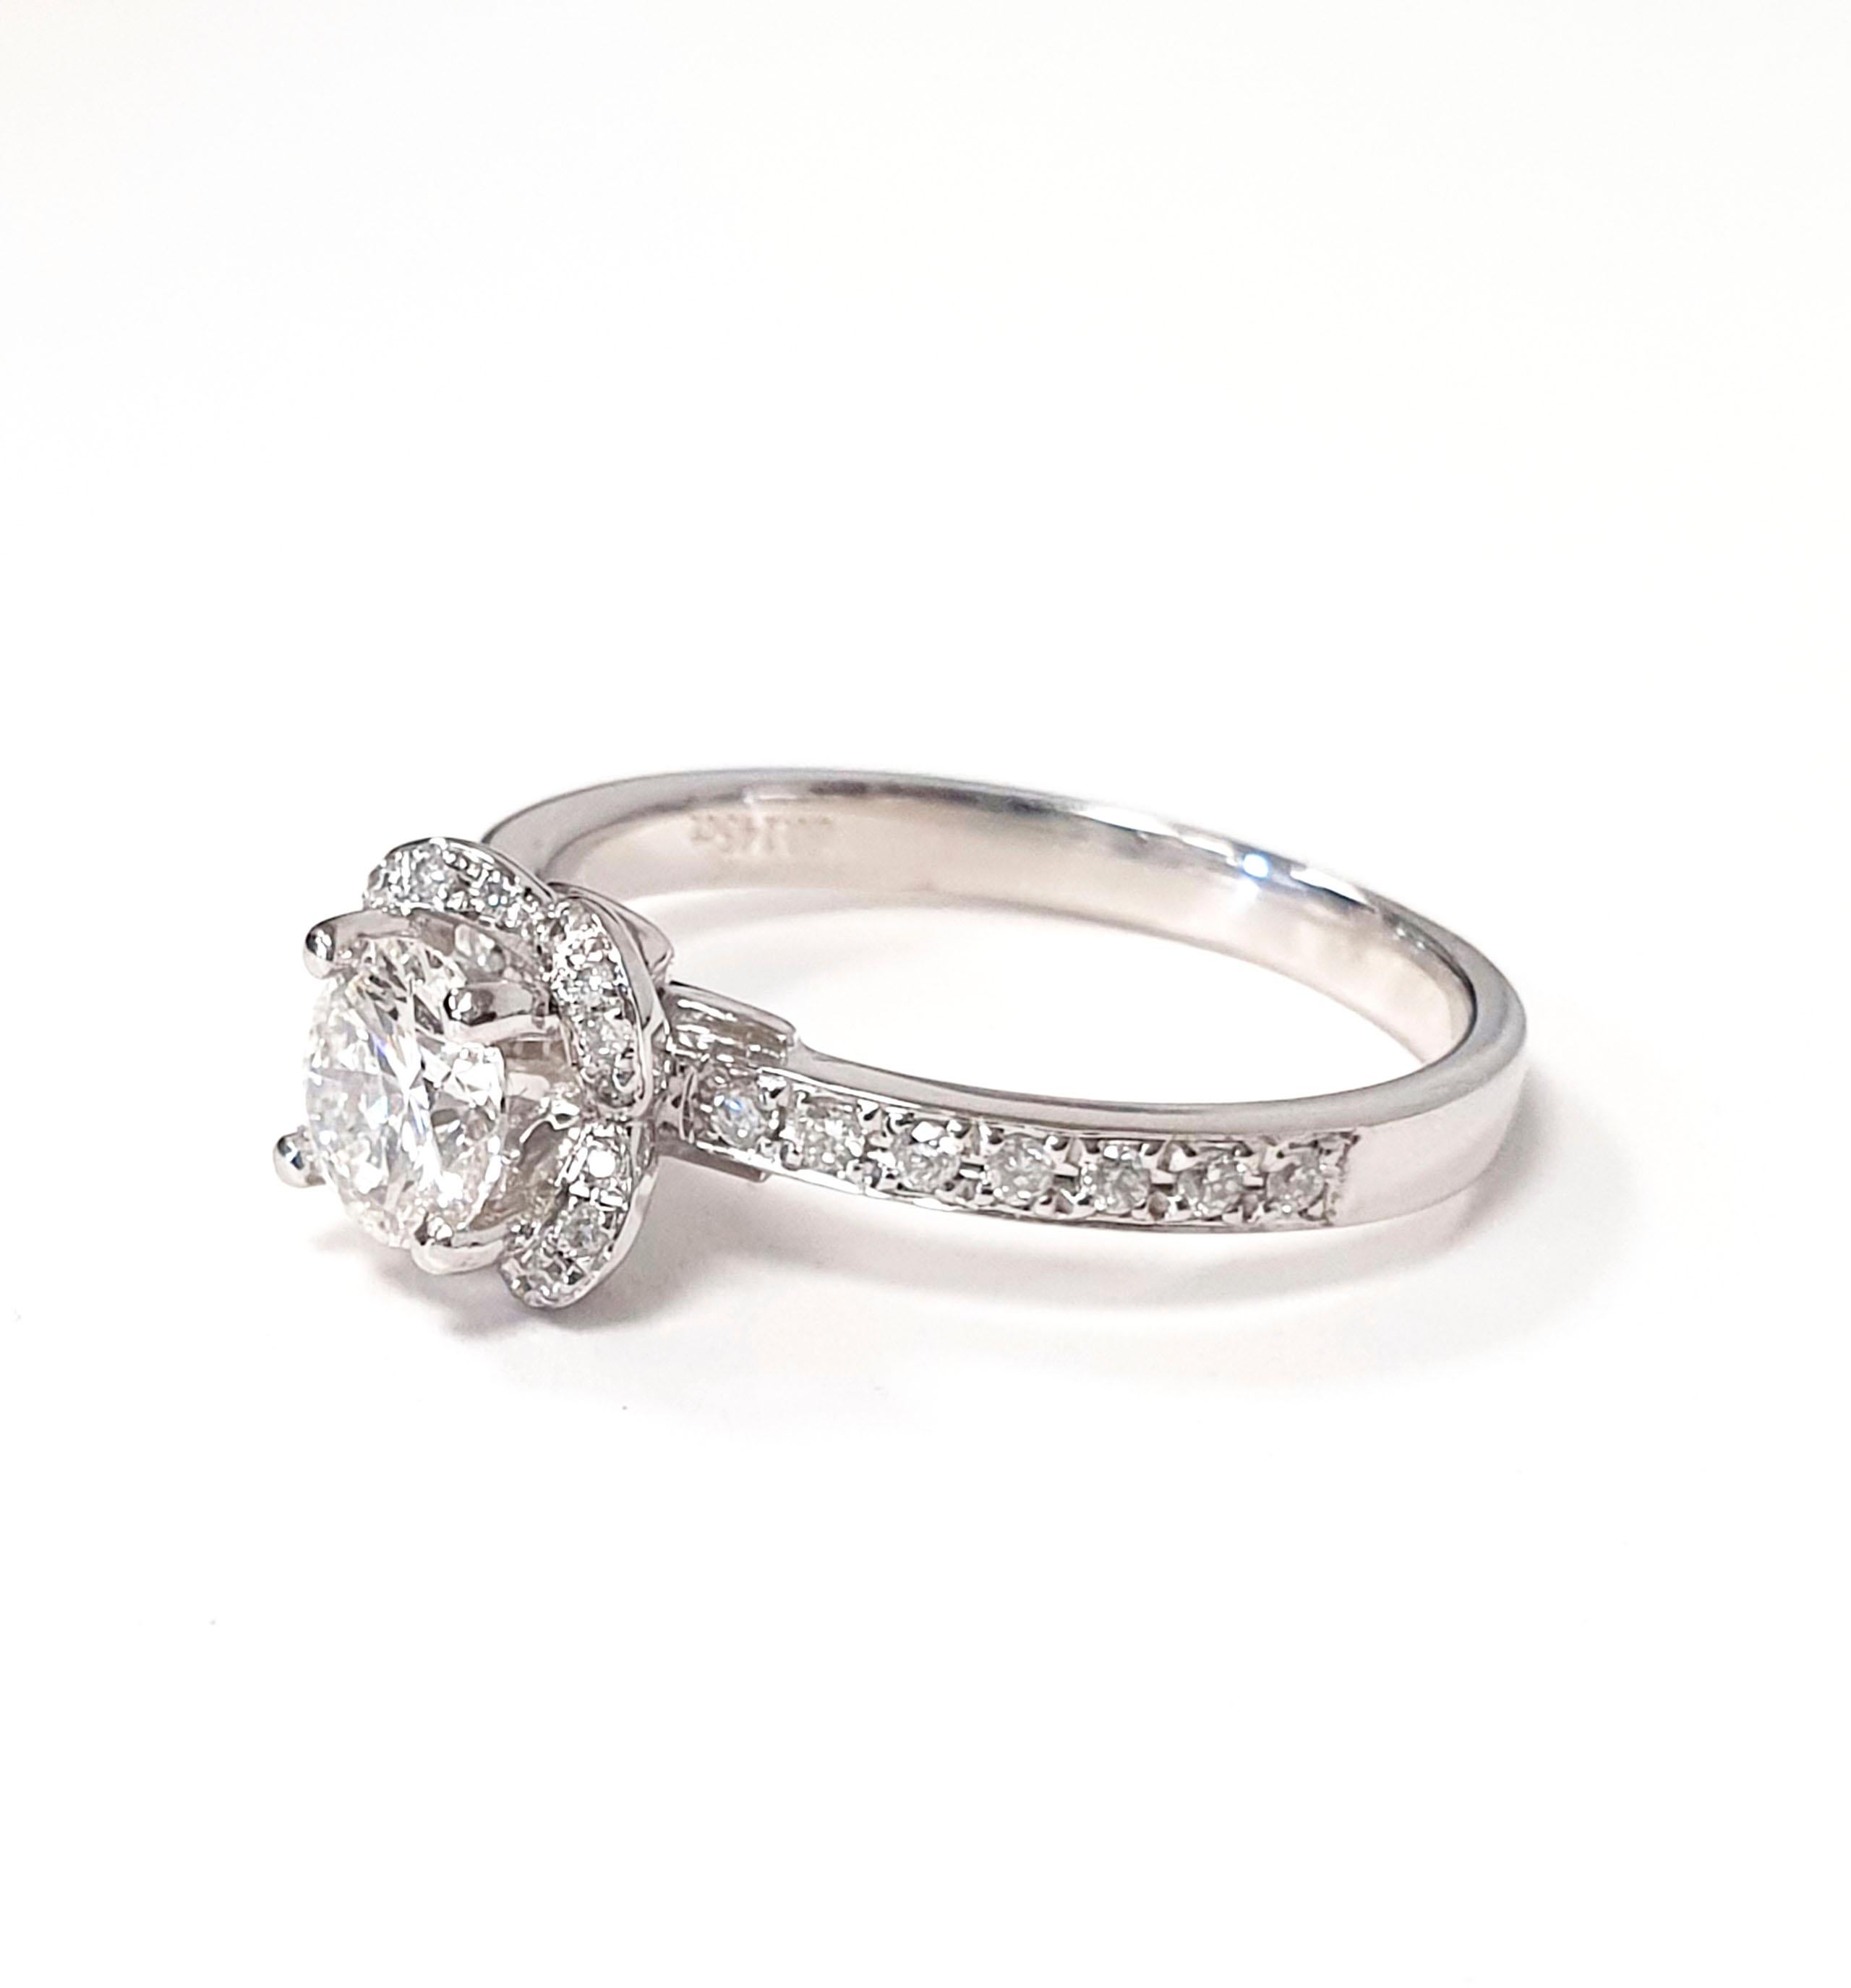 At the heart of this mesmerising ring, a luminous centre stone takes centre stage. With a weight of 0.5 carats, this brilliant diamond radiates unmatched brilliance, symbolising the unique and profound love shared between two individuals. It is